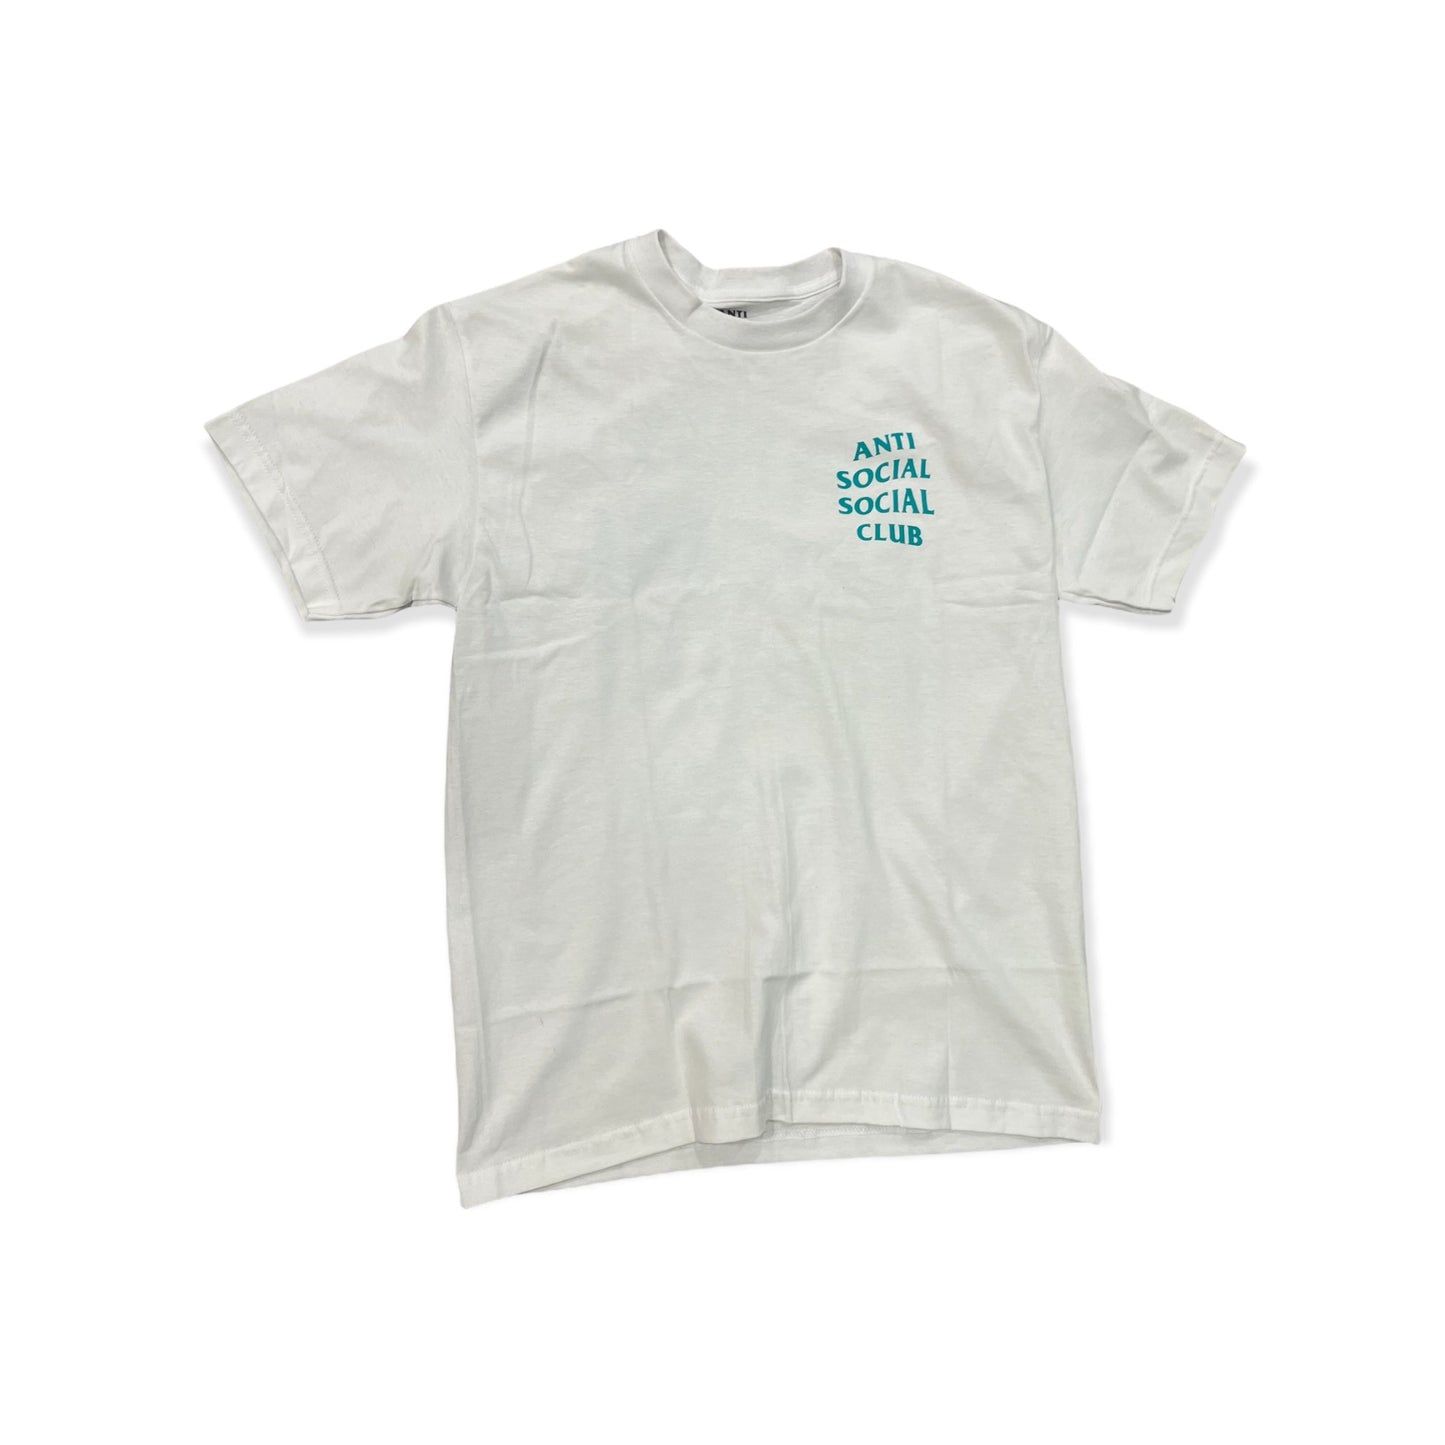 Boots à Lacet Daix Gris Logo Tee White / Teal - Sneakersbe Sneakers Sale Online